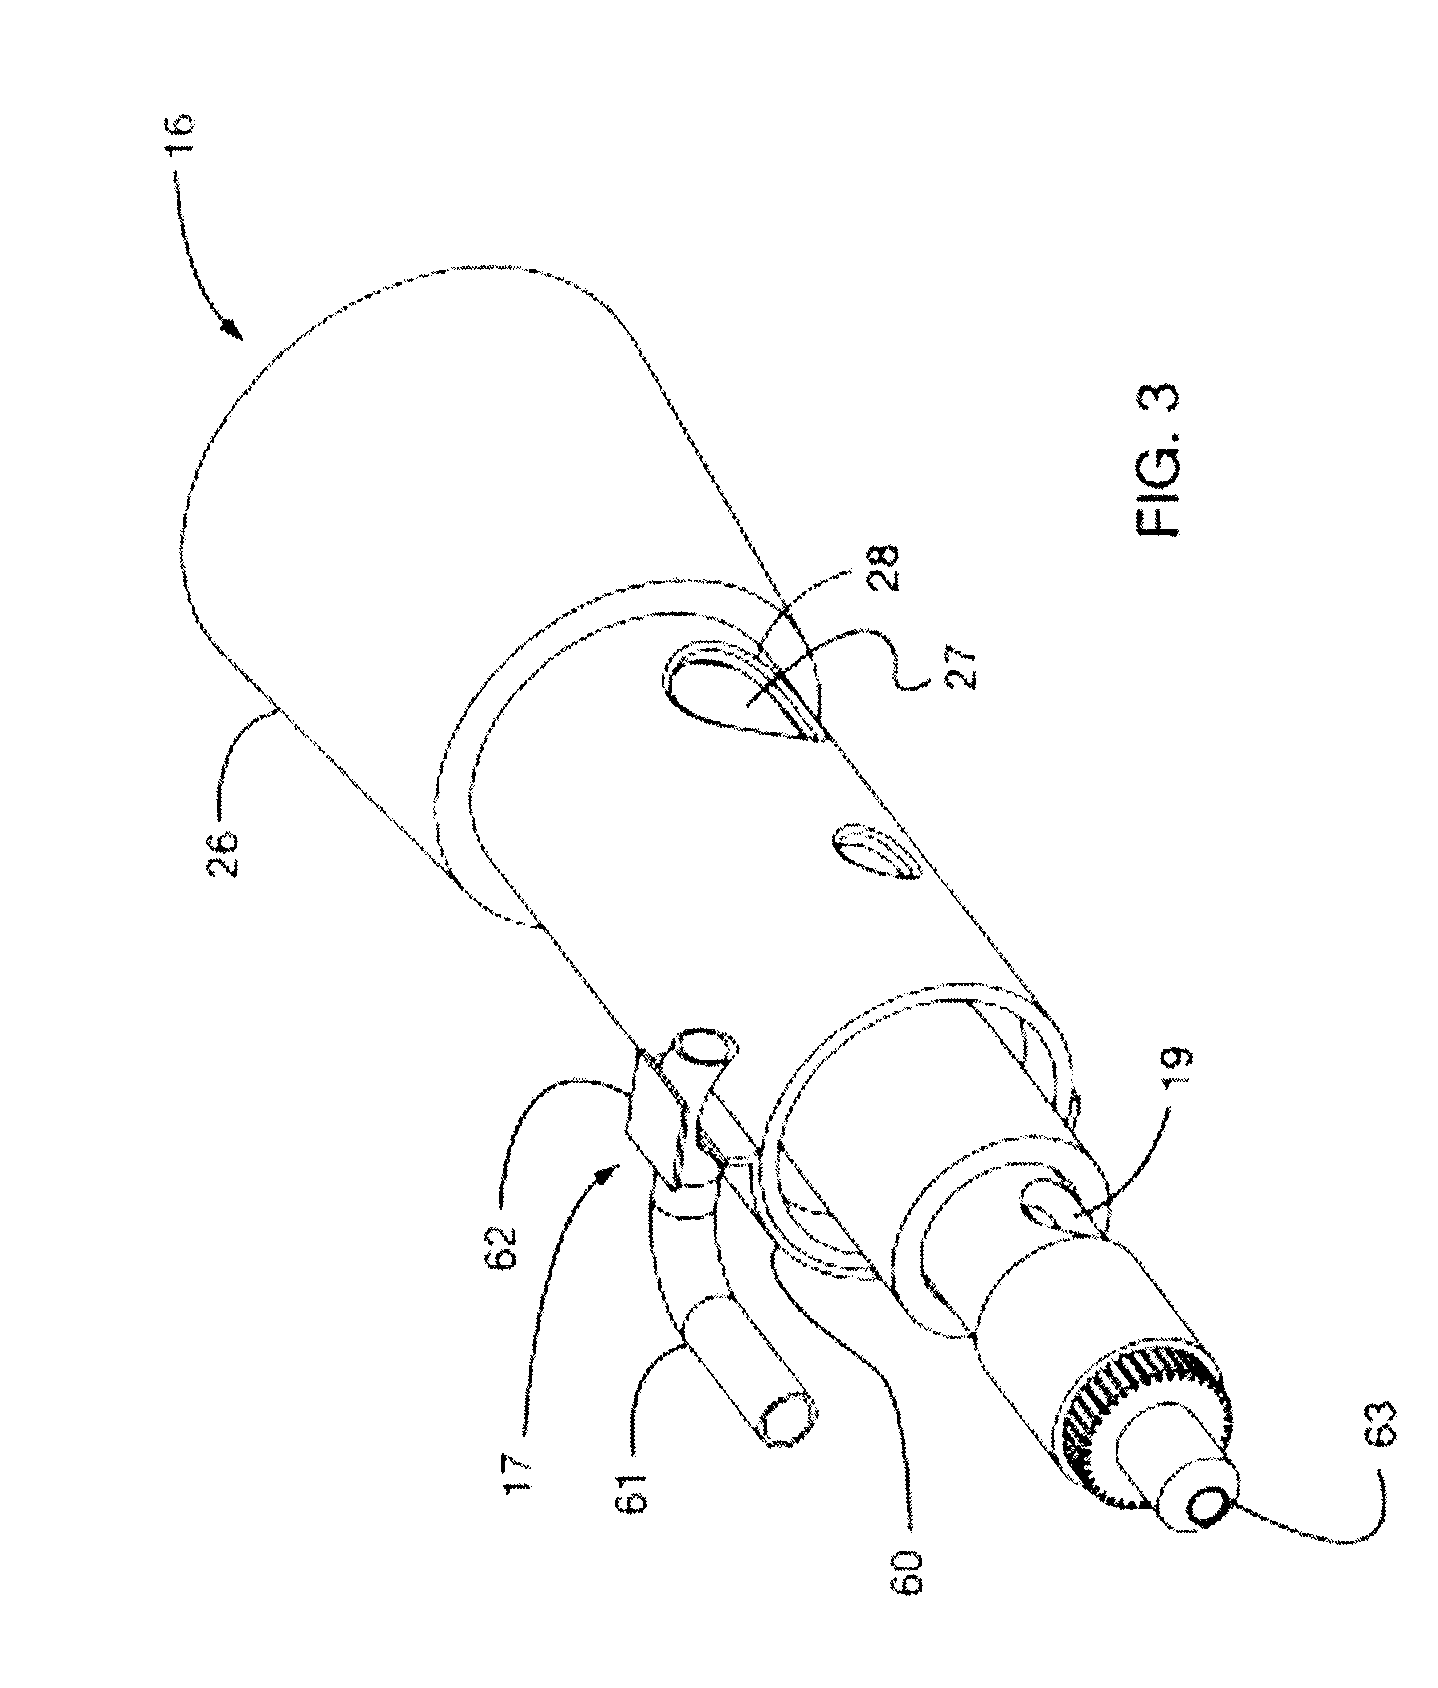 Devices for vaporization of a substance